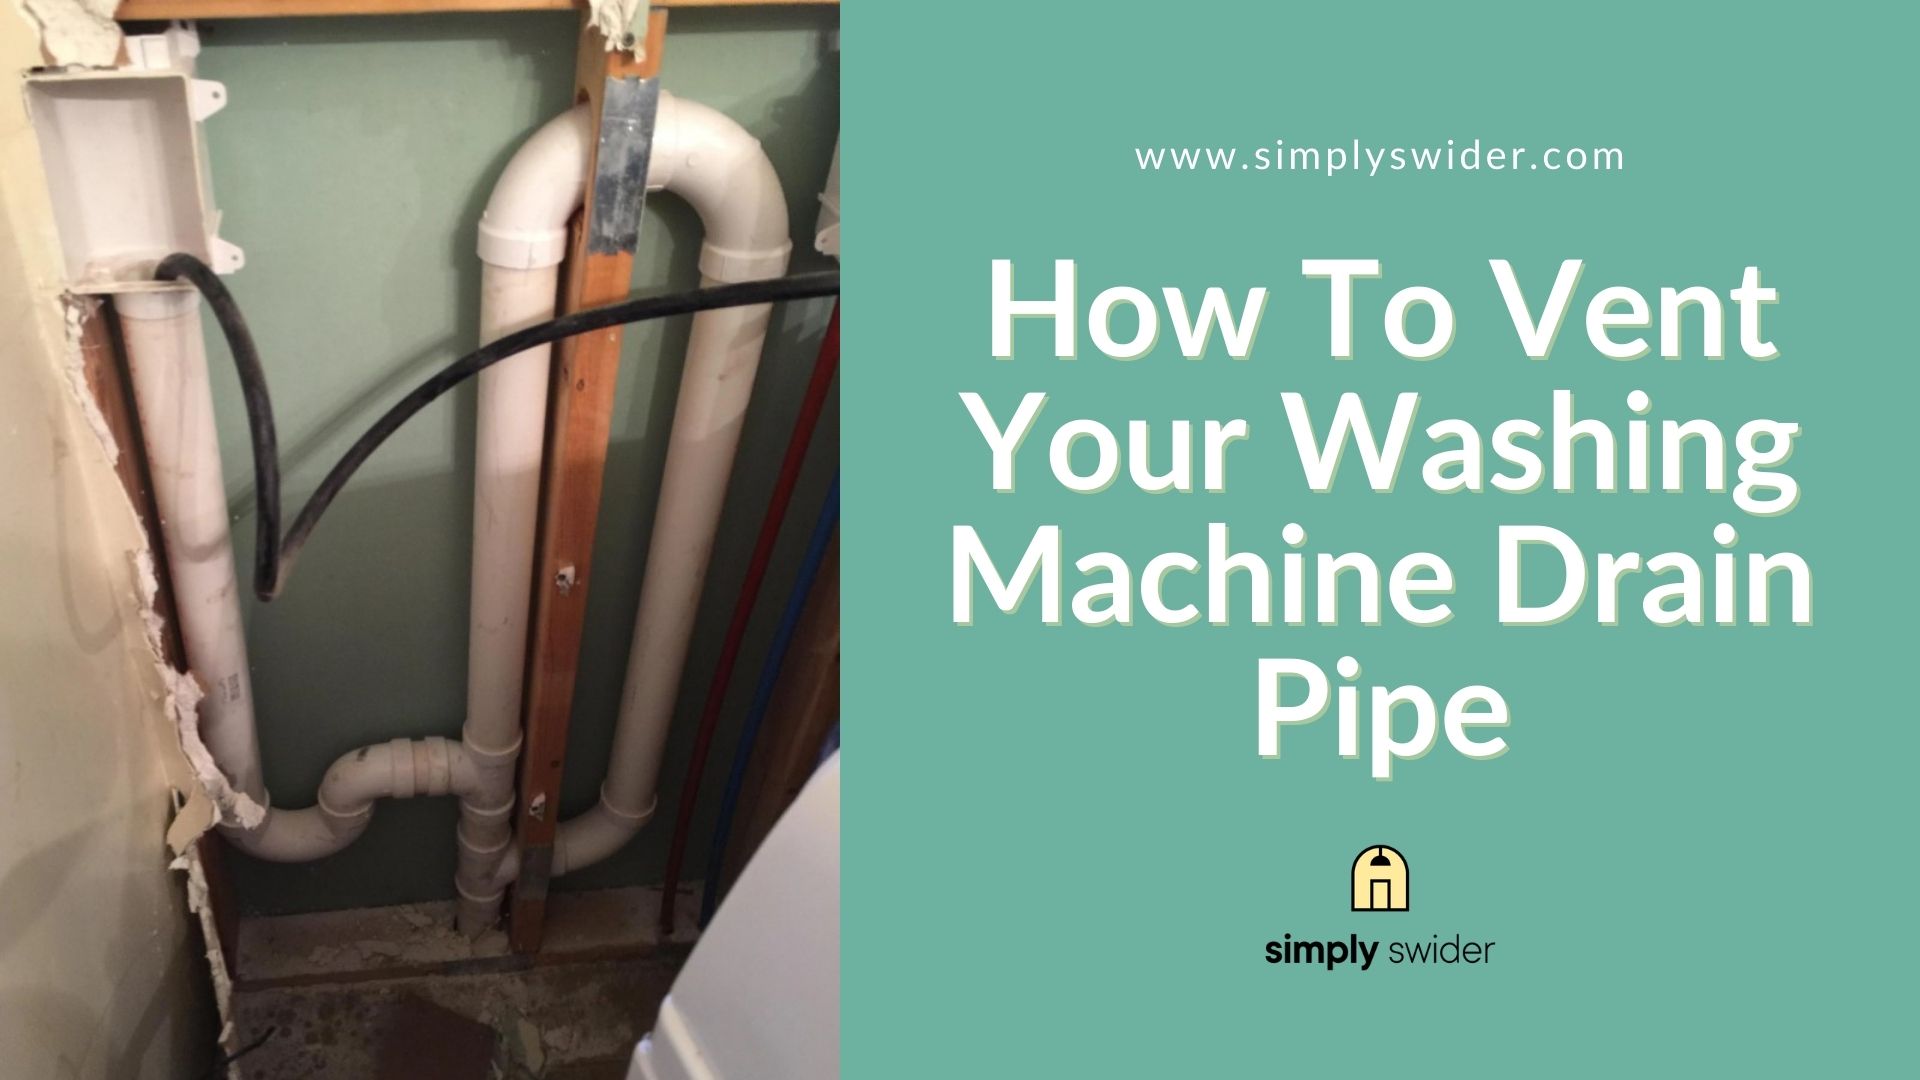 How To Vent Your Washing Machine Drain Pipe